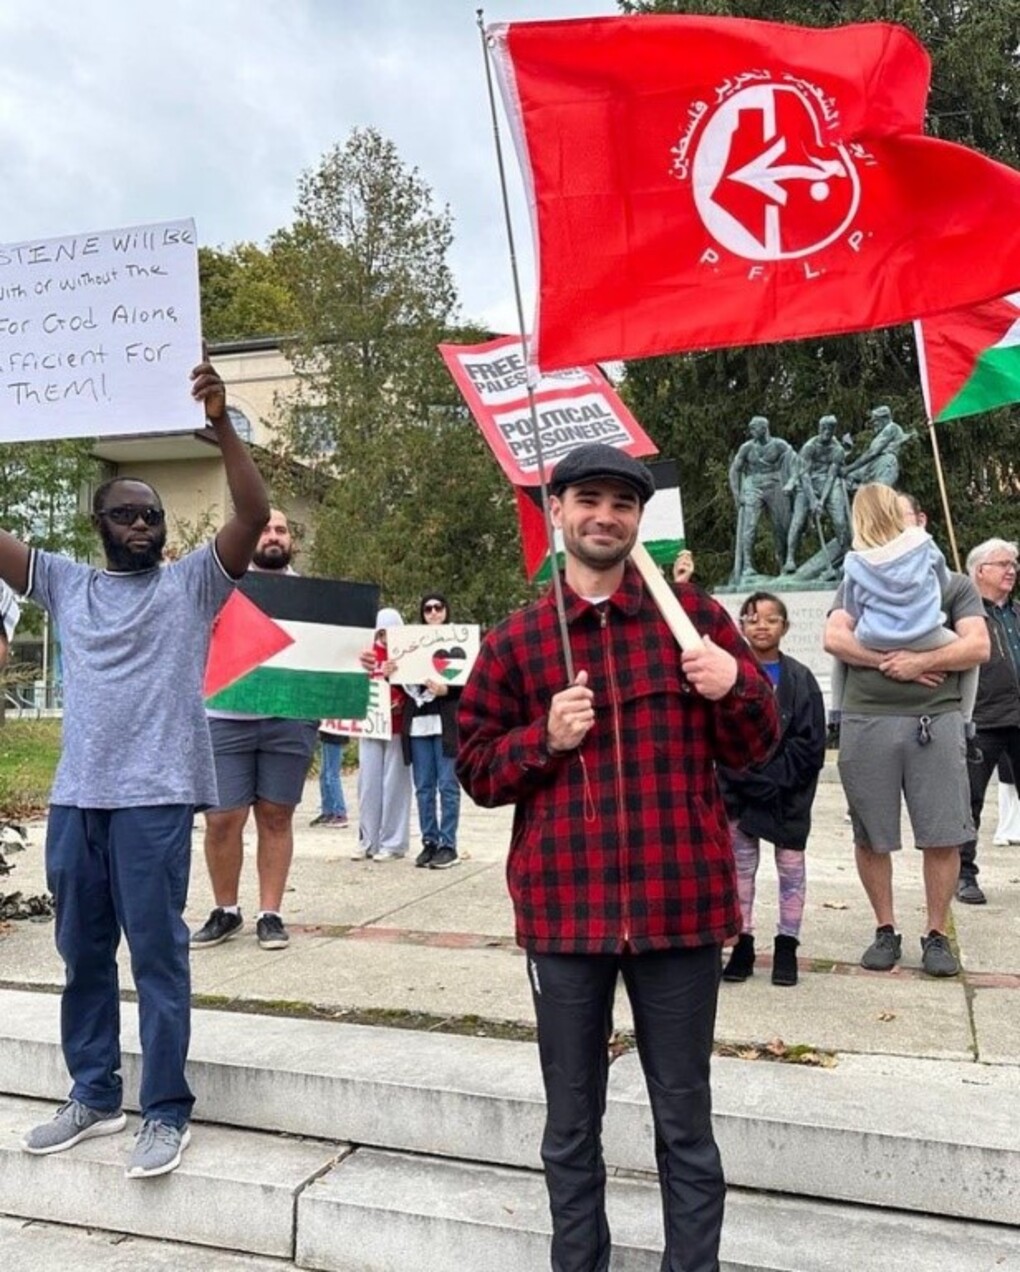 Support for Hamas Terror at Anti-Israel Rallies Across the U.S.